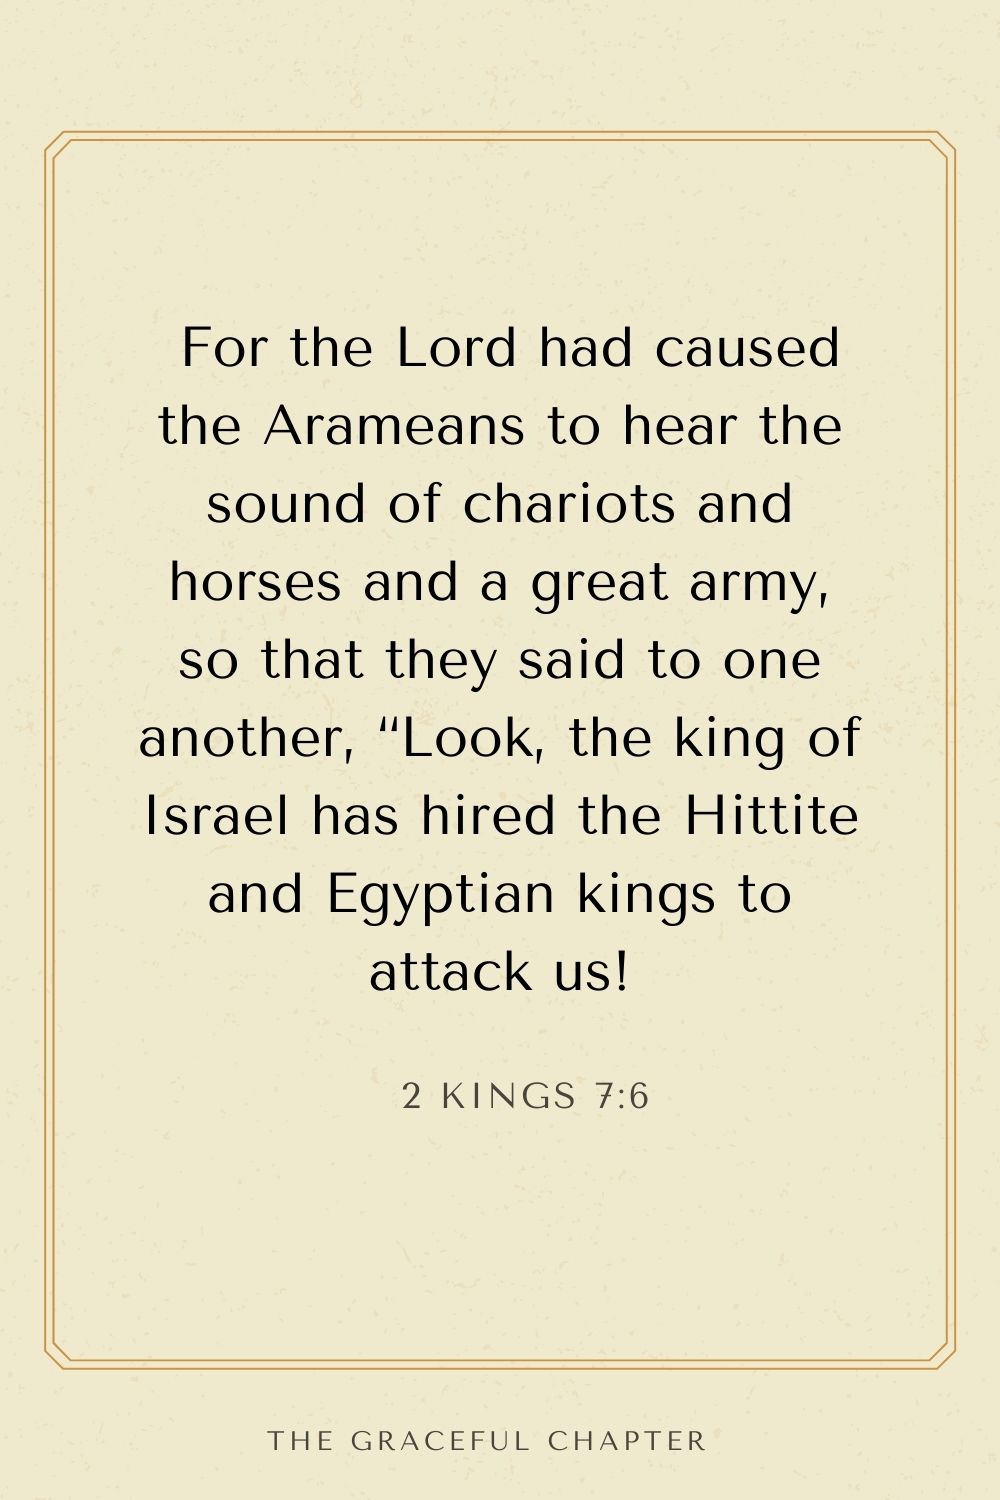 For the Lord had caused the Arameans to hear the sound of chariots and horses and a great army, so that they said to one another, “Look, the king of Israel has hired the Hittite and Egyptian kings to attack us! 2 Kings 7:6